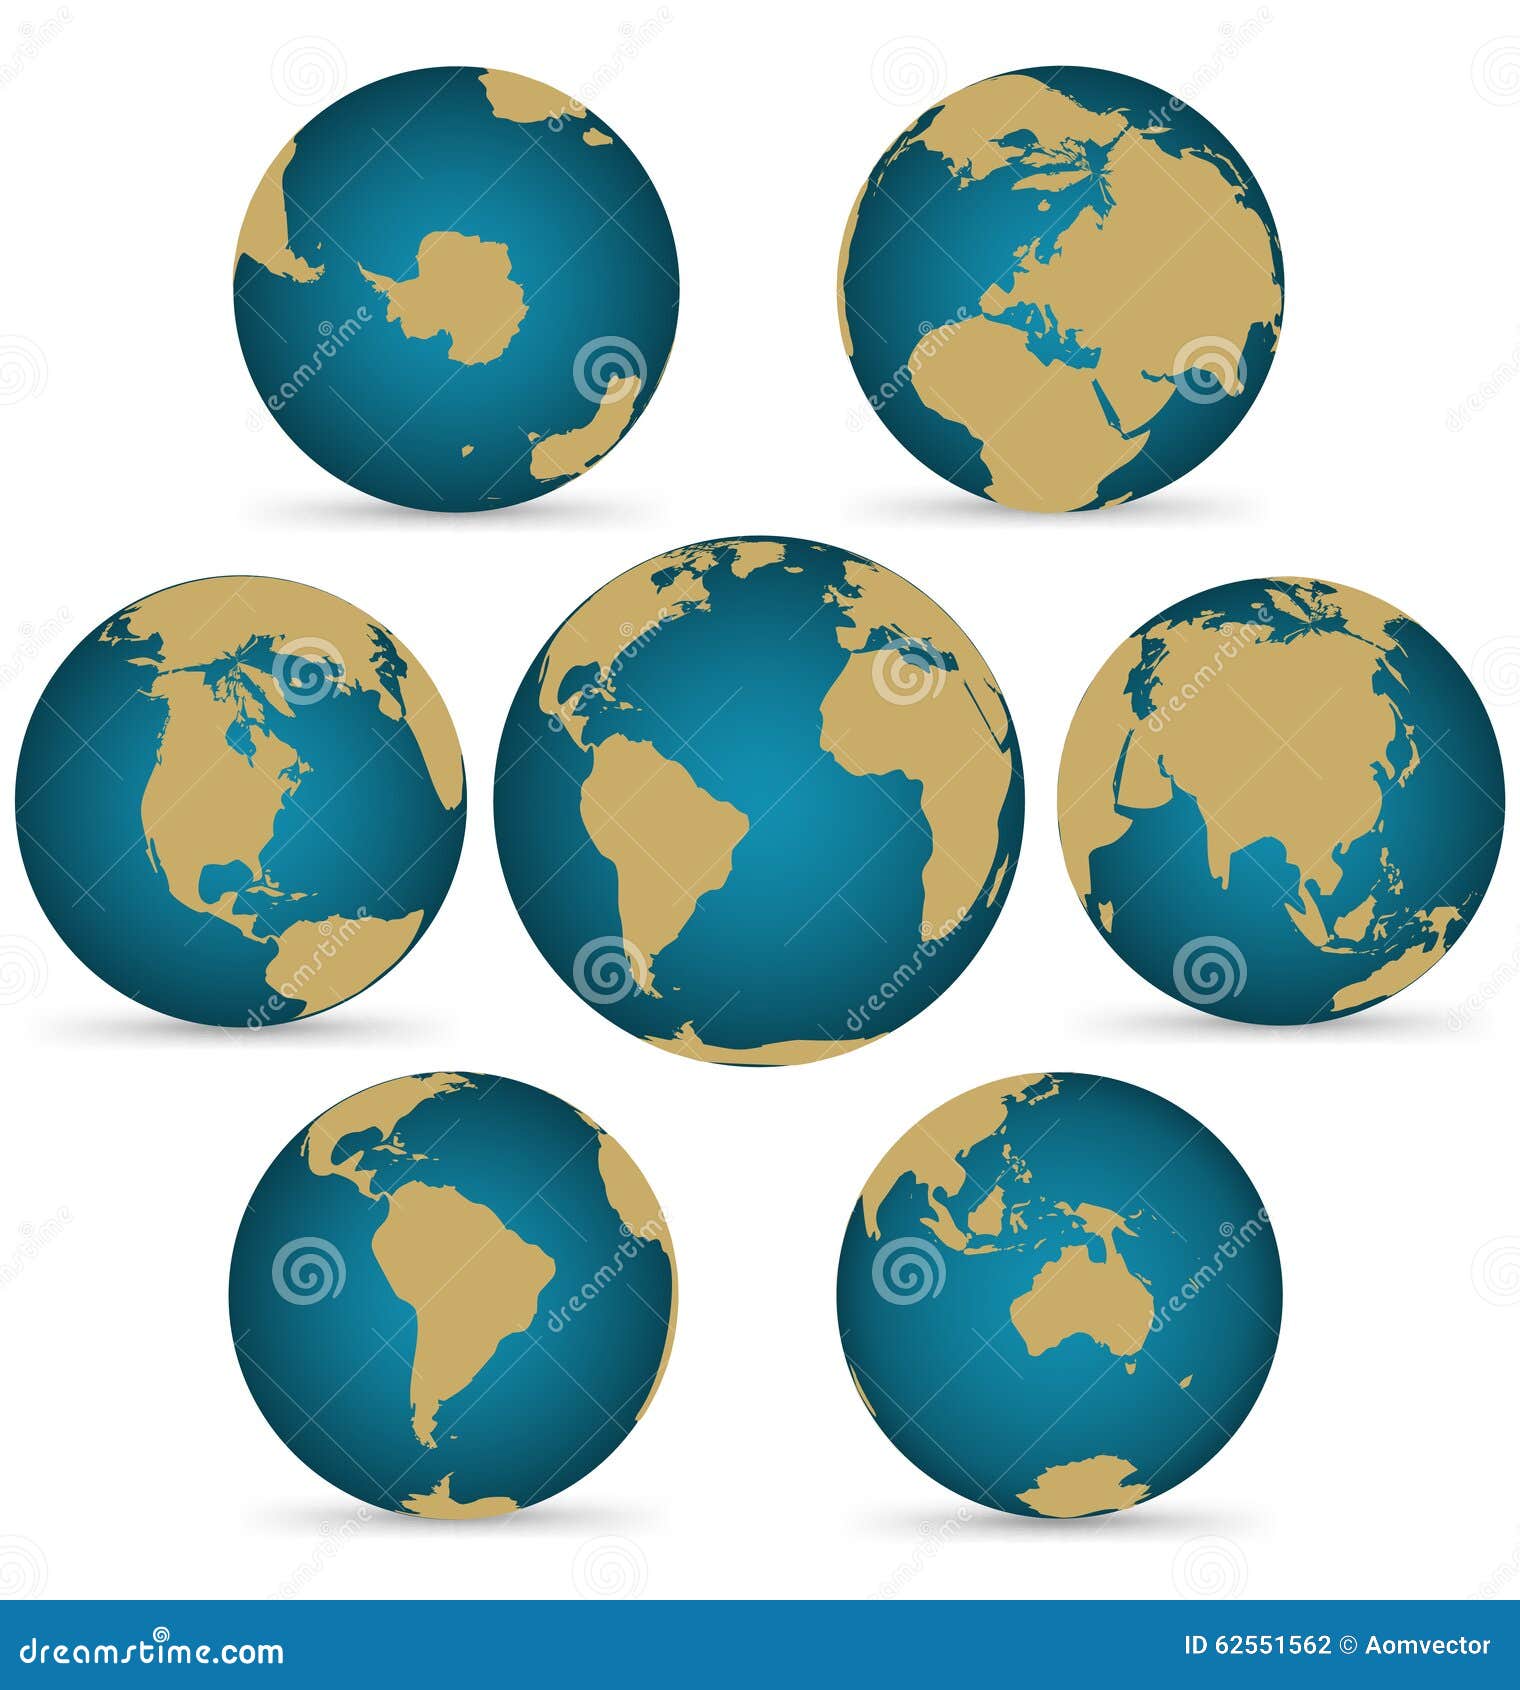 continent on rotatable globe